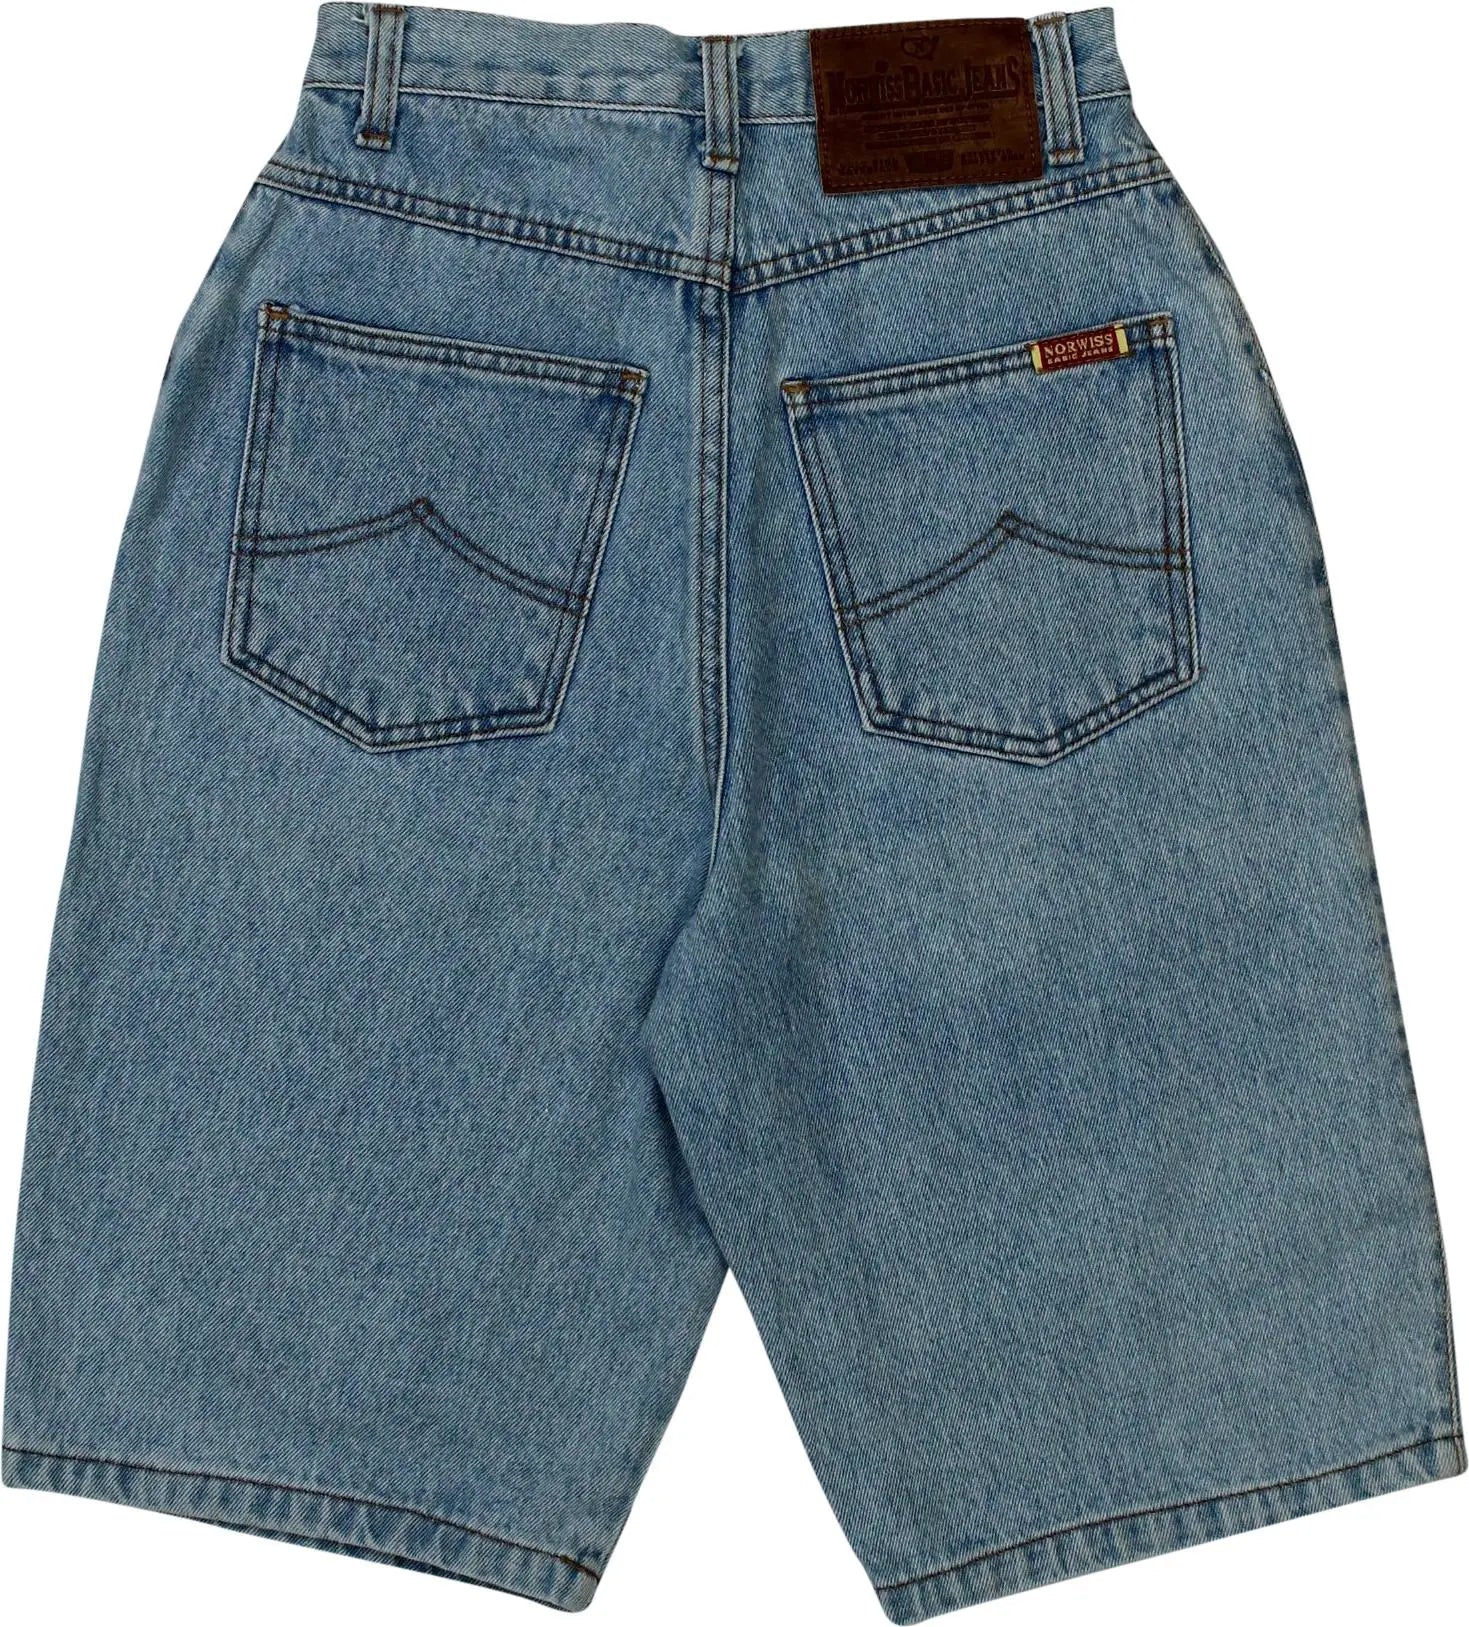 Norwiss - Blue Denim Shorts- ThriftTale.com - Vintage and second handclothing